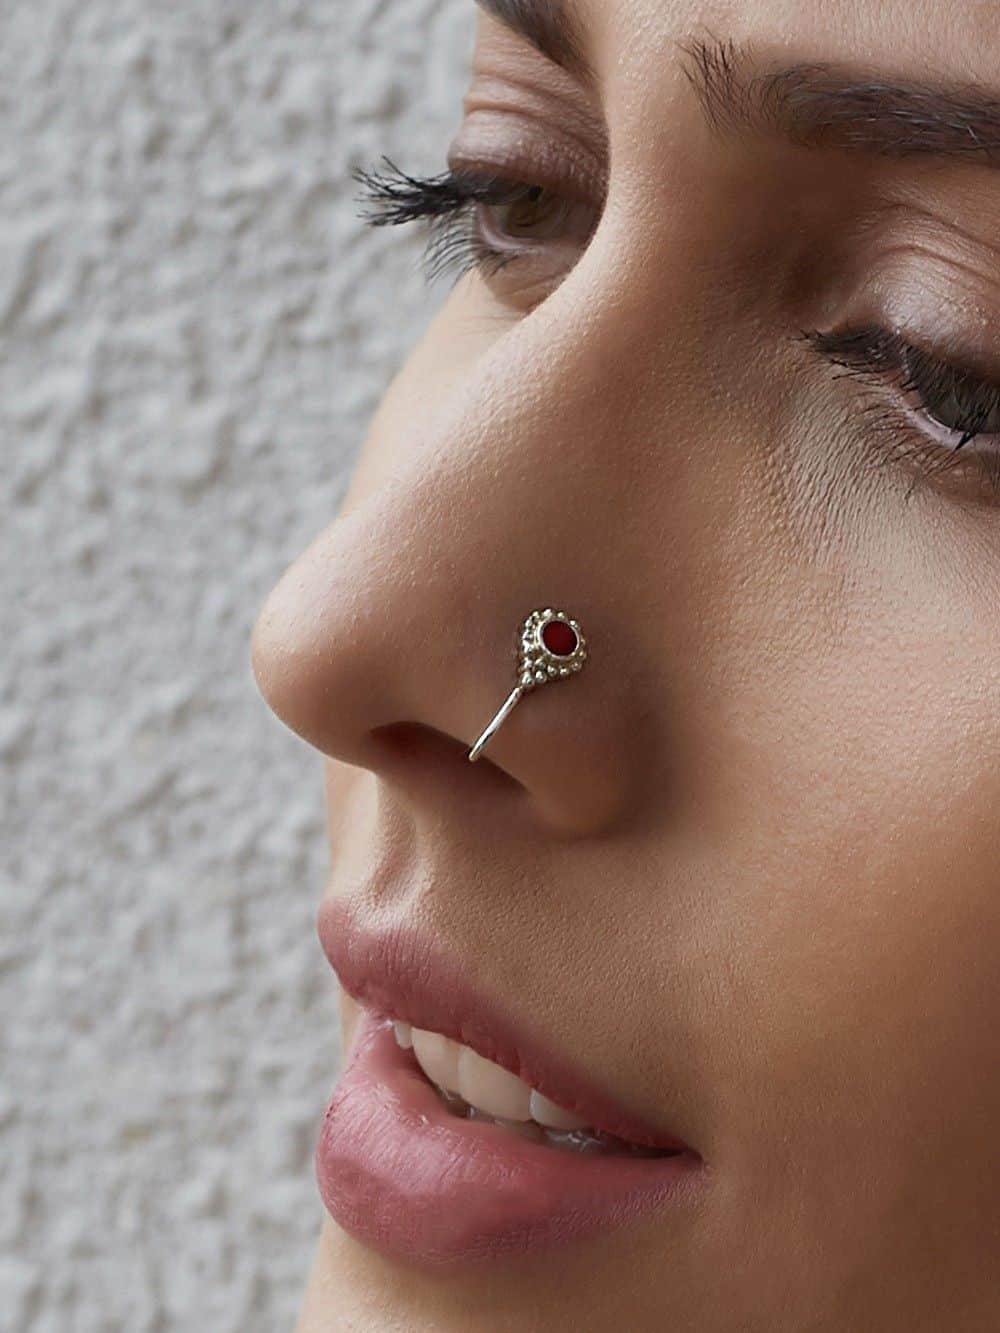 Types of Nostrils Piercing Jewelry